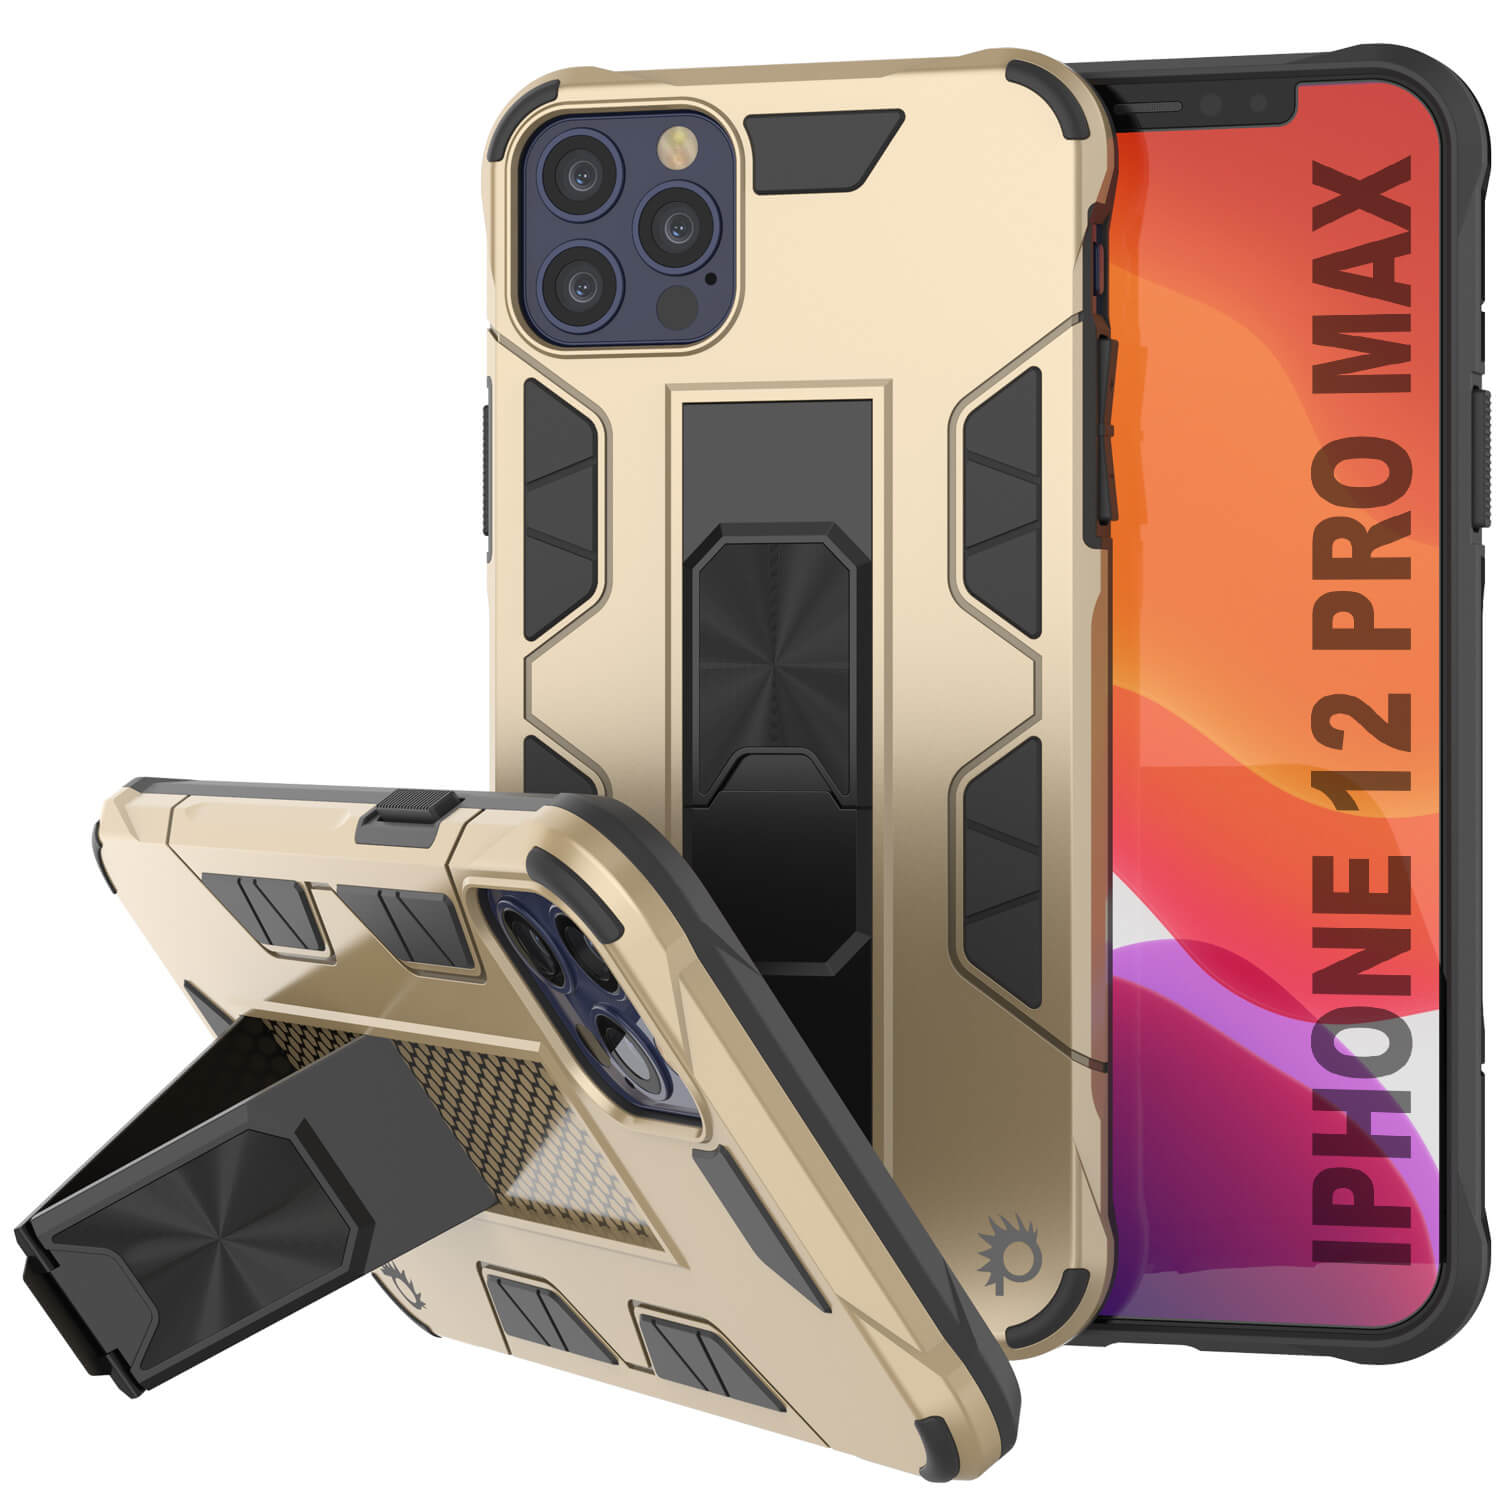 Punkcase iPhone 12 Pro Max Case [ArmorShield Series] Military Style Protective Dual Layer Case Gold - Gold